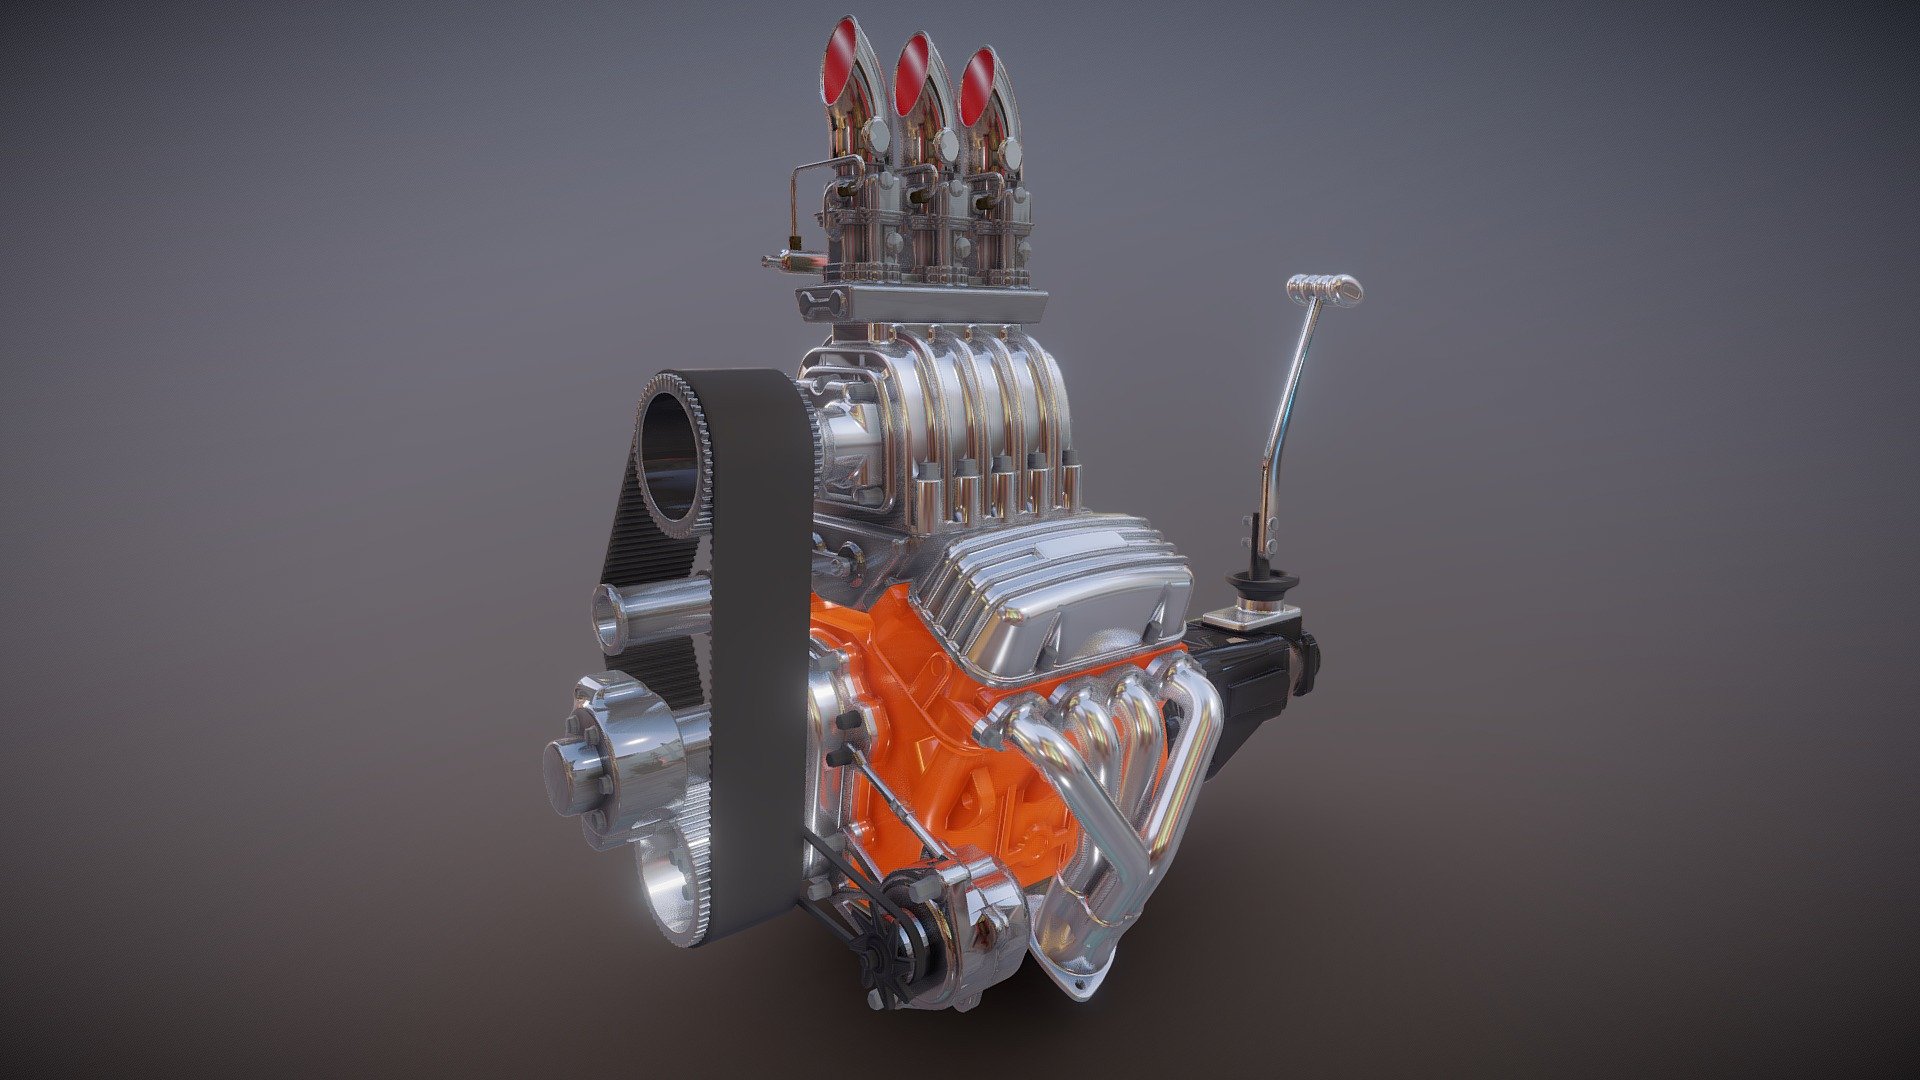 Cartoon V8 vintage engine highpoly model.
Model aviable as nurms model and as polygonal mesh.

parts list -

Small block. Heads. Chrome finned head covers. Transmission. Hurst shifter. Fuel pump. HotRod exhaust headers. Classic look supersharger. Oil pan. Custom manifold. Tim cover. Ignition coil. Fuel rails 3d model